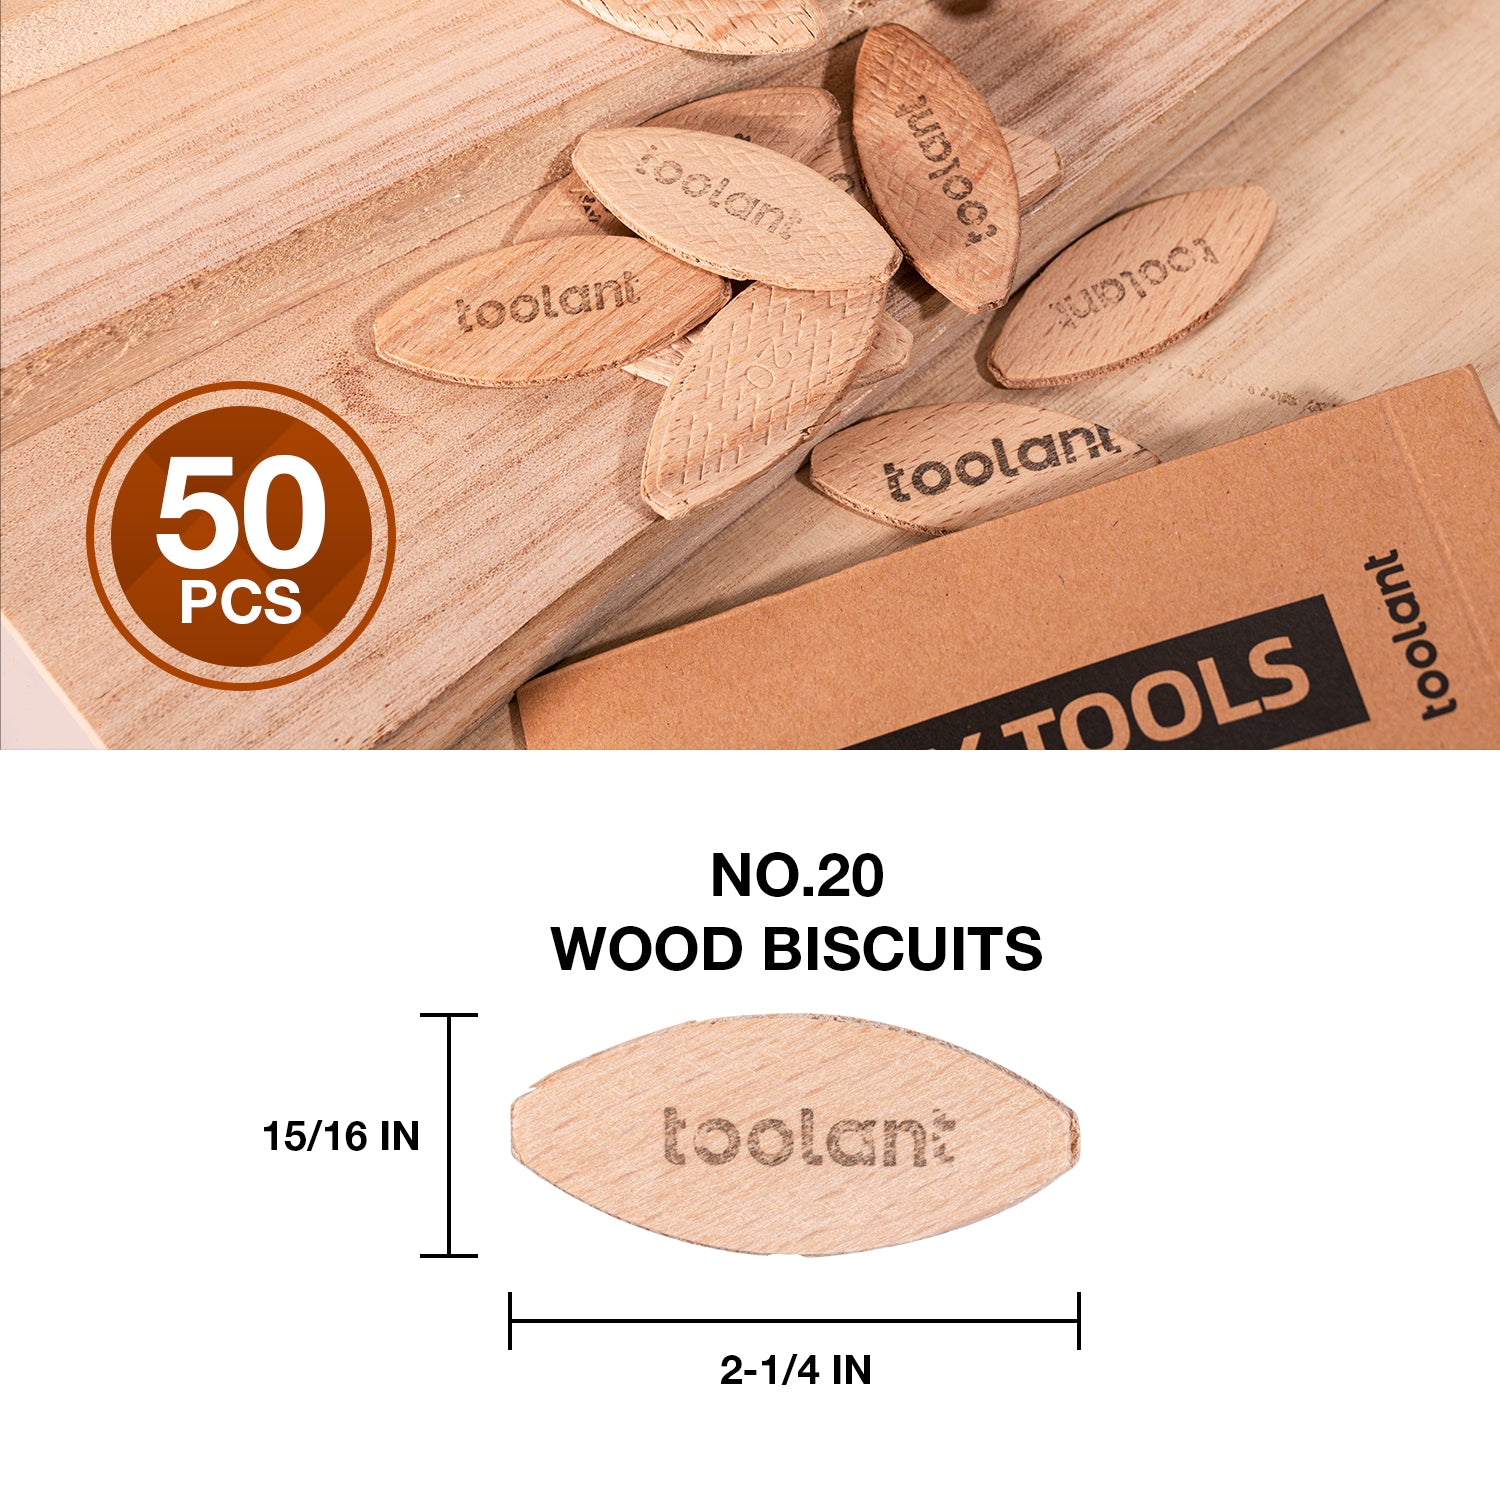 Milescraft 5436#20 Hardwood Biscuits (1000 Pack) for Use in Wood Joining Woodworking and Crafting Works with Standard Biscuit Joiners Size #20, Natu